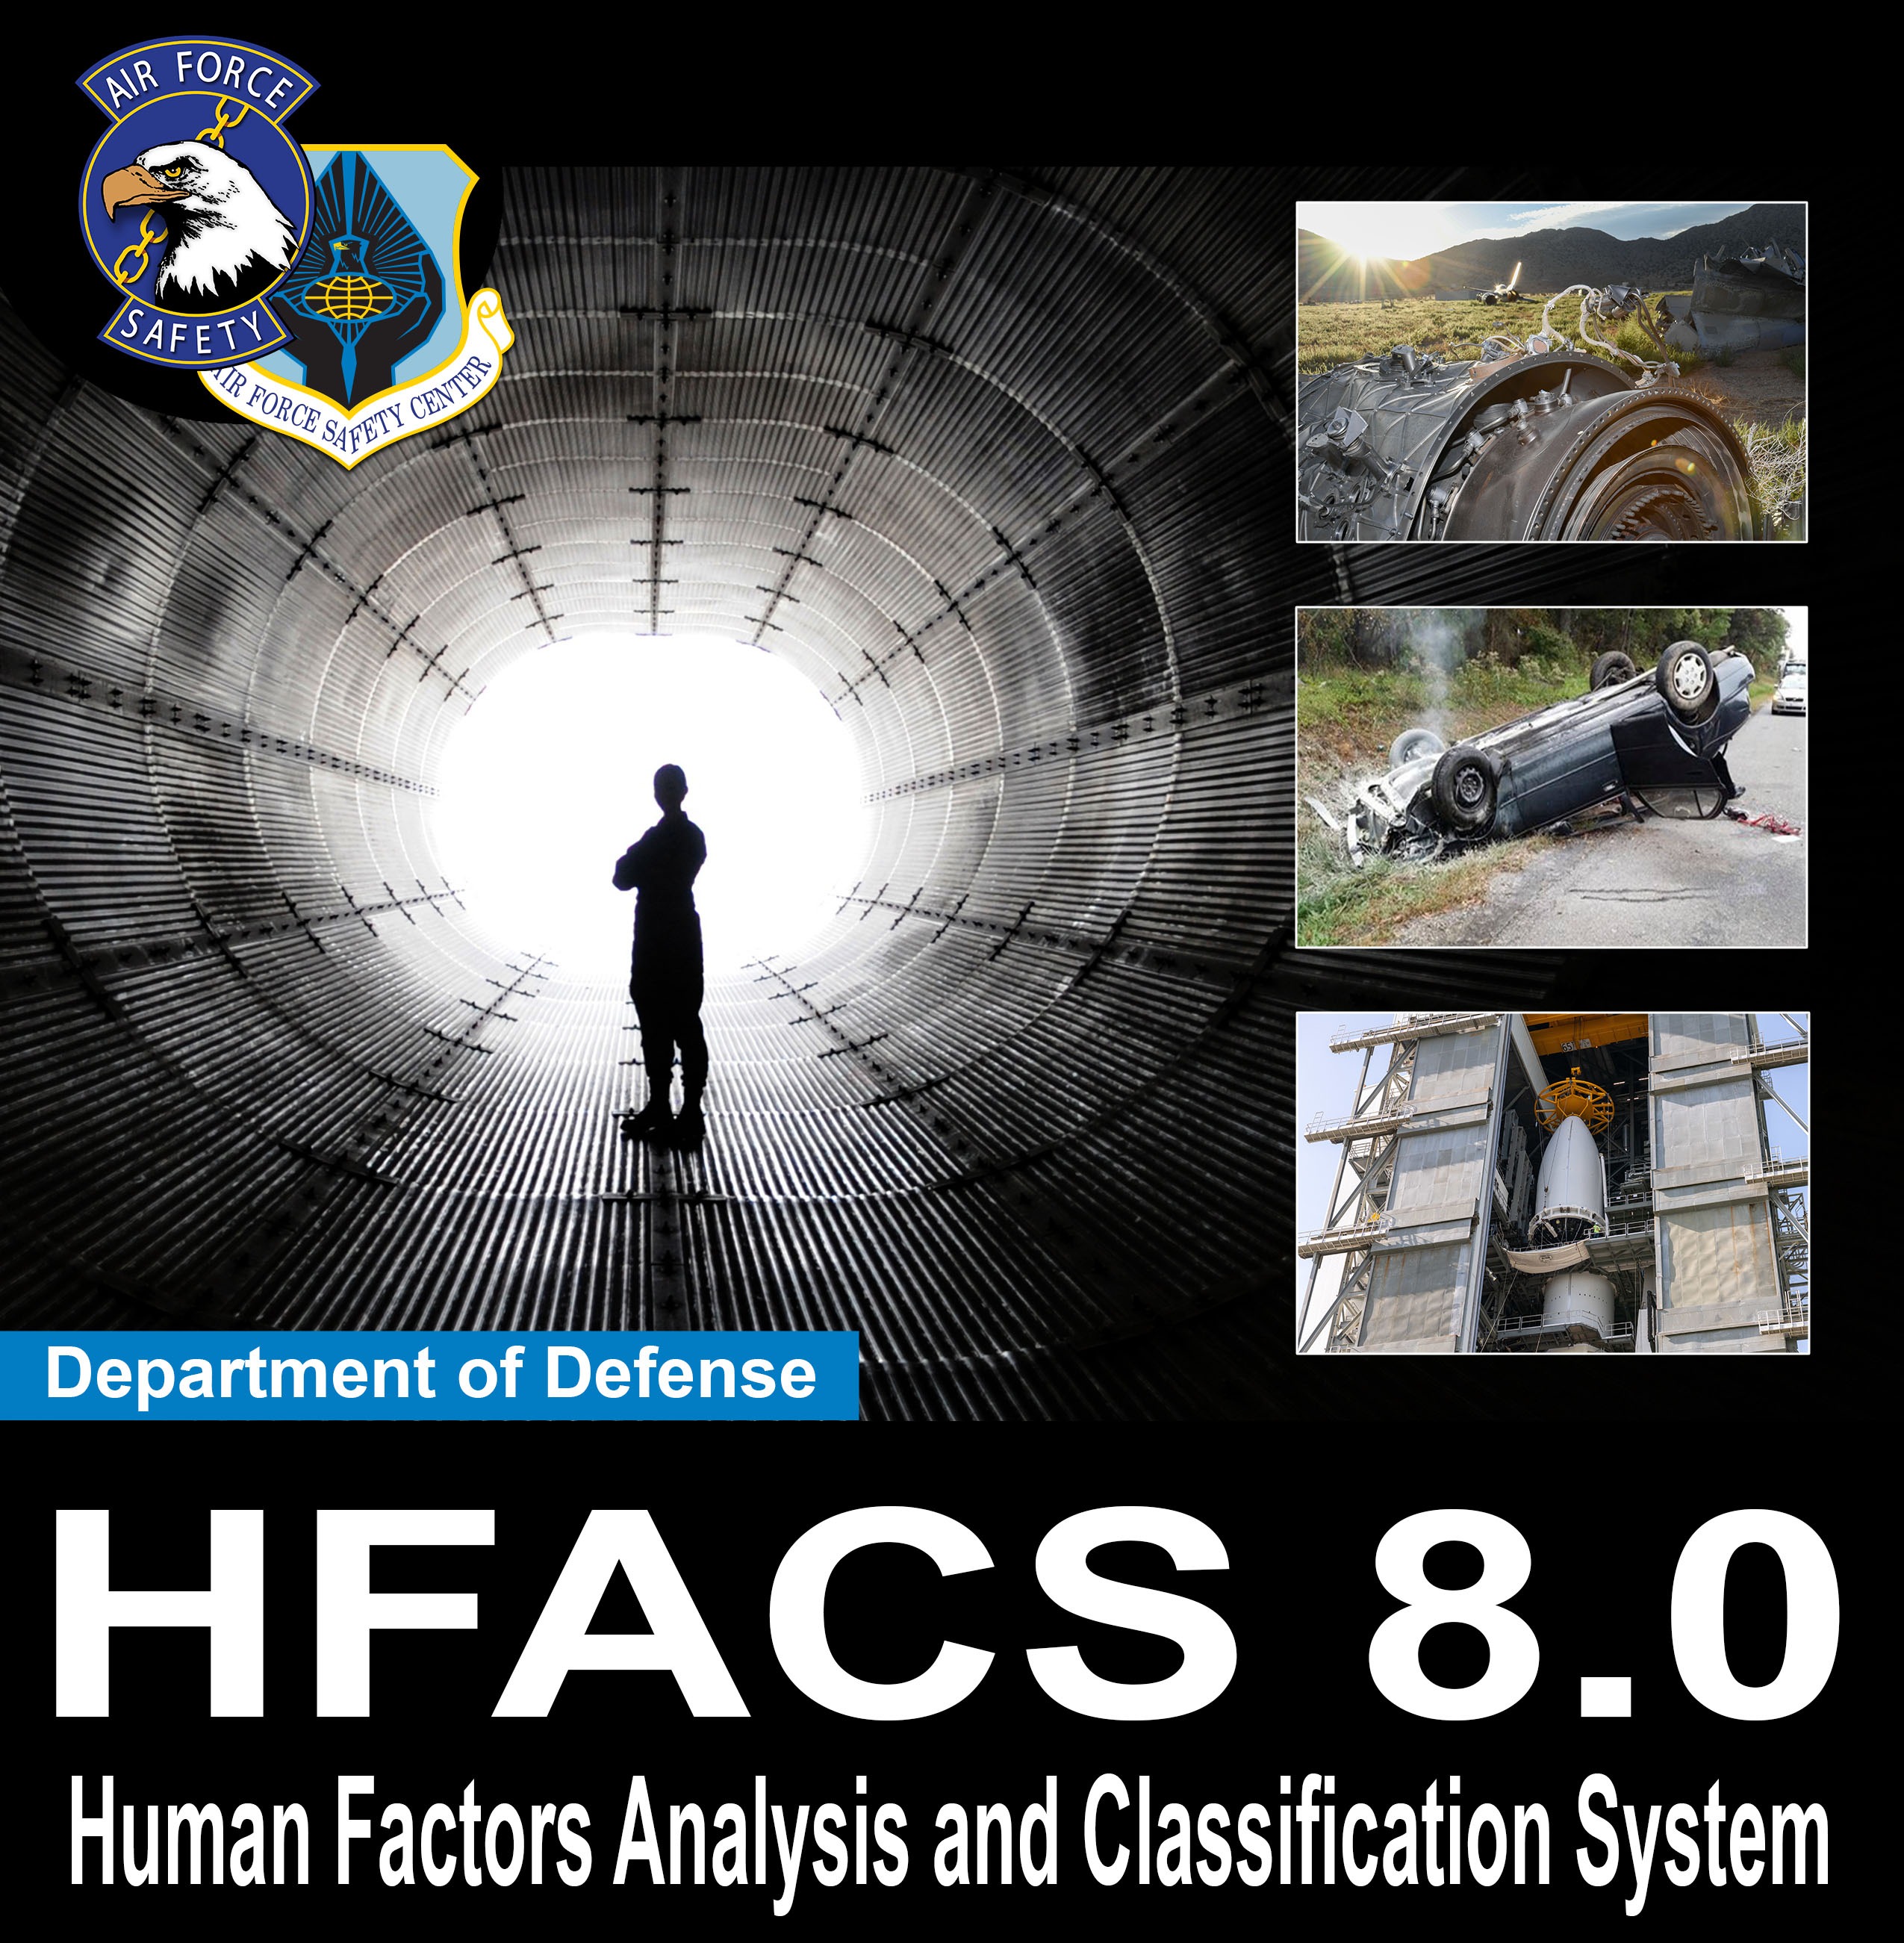 Click here to access Human Factors Analysis and Classifications System information